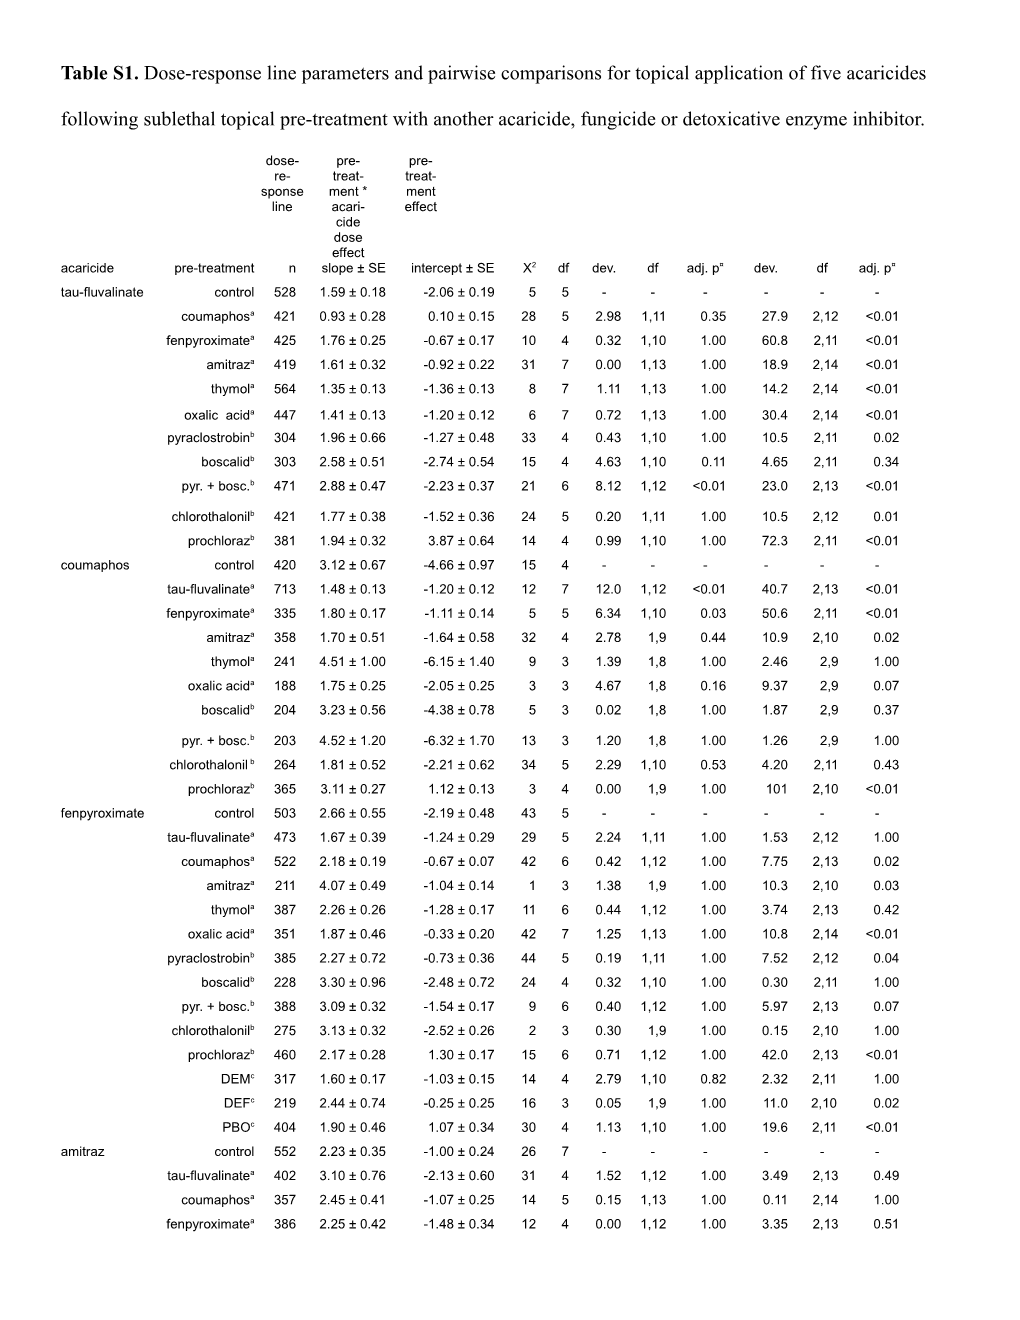 Table S1. Dose-Response Line Parameters and Pairwise Comparisons for Topical Application